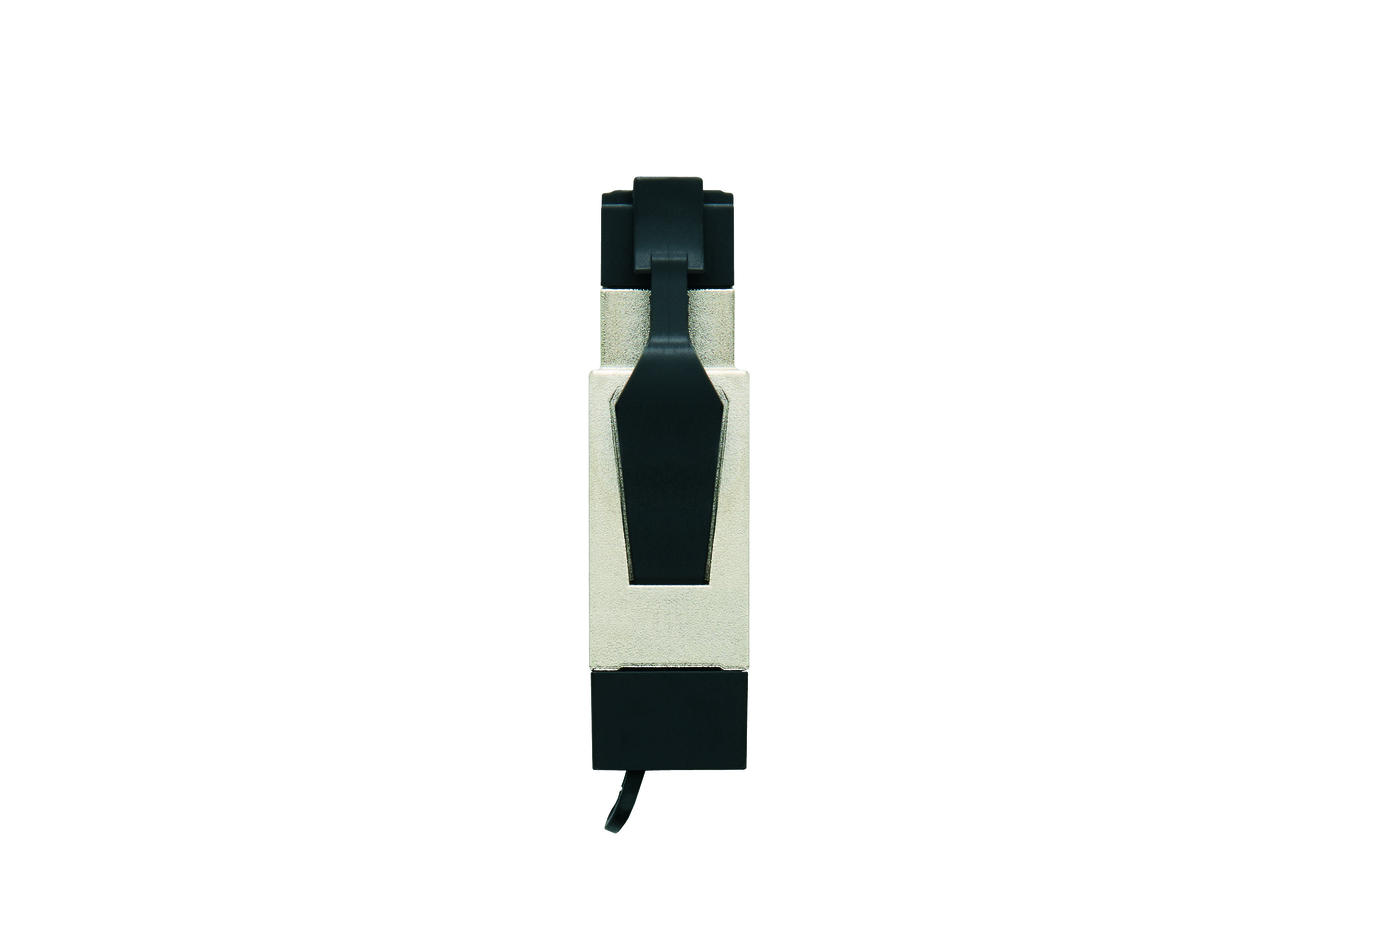 Field-wireable, RJ45, male, straight, 8 poles, insulation displacement contact, shielded, 50V 1A